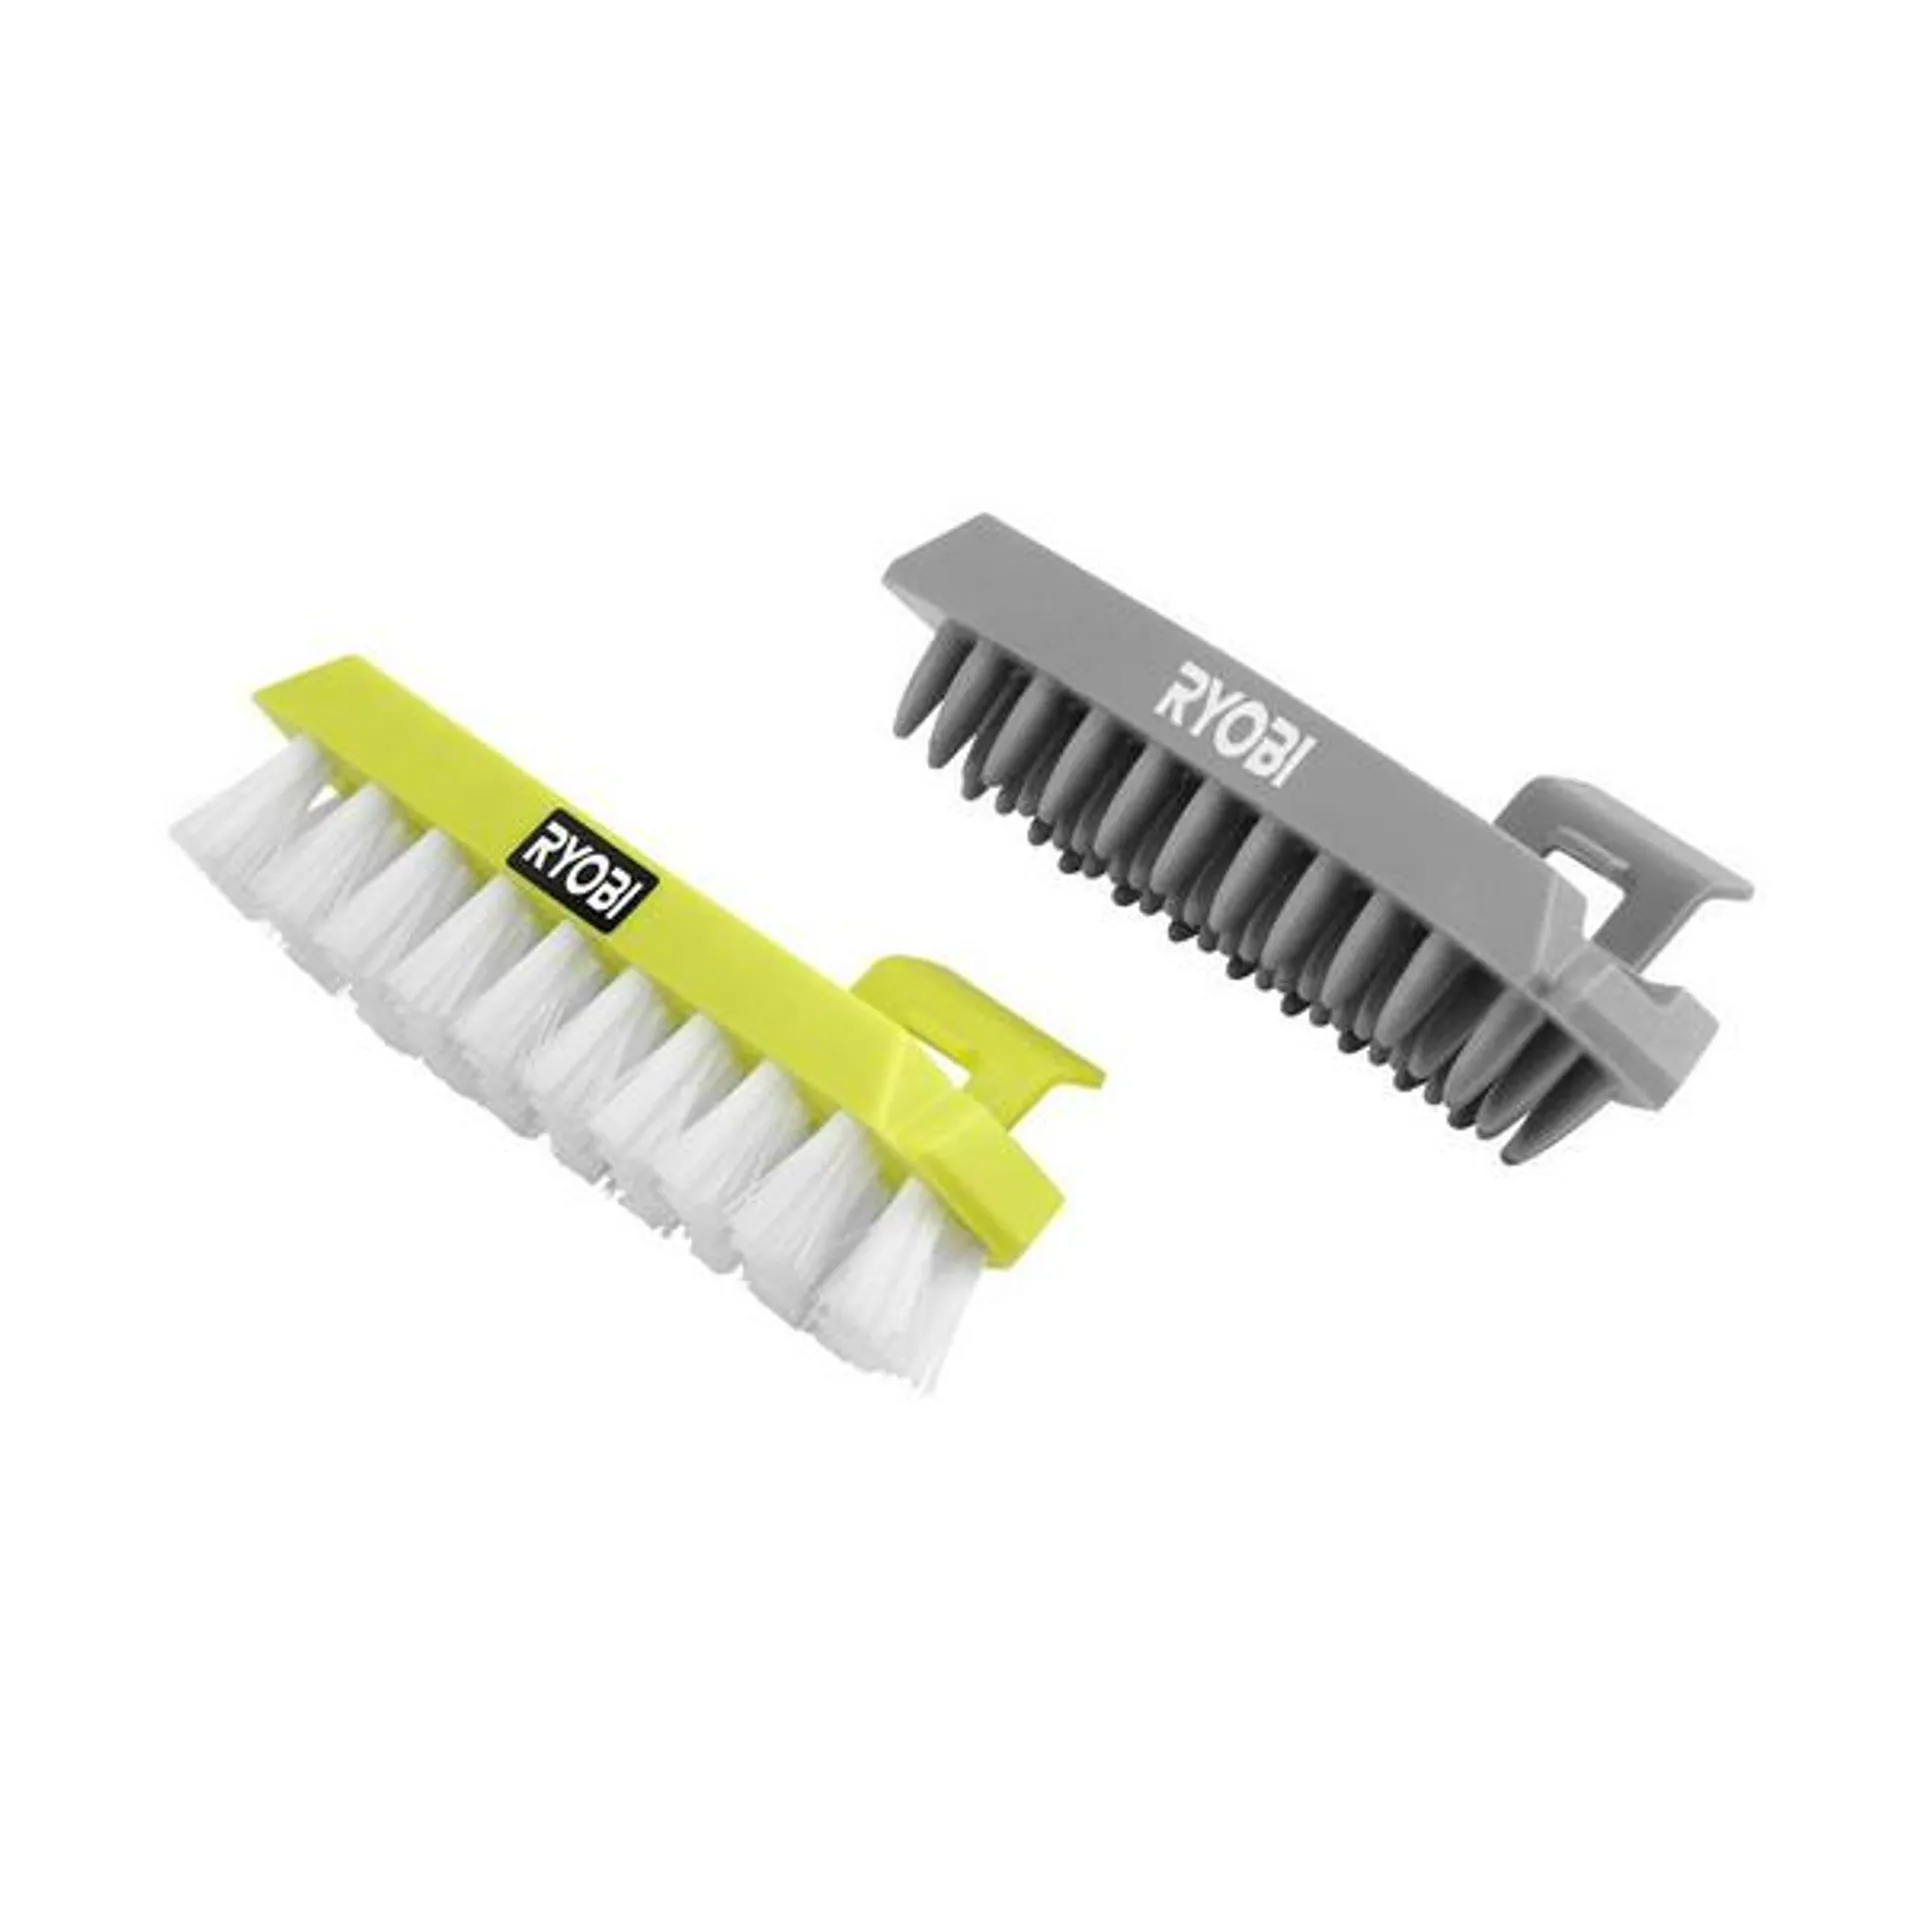 2 PC. 4" SWIFTCLEAN™ MID-SIZE SPOT CLEANER ACCESSORY KIT